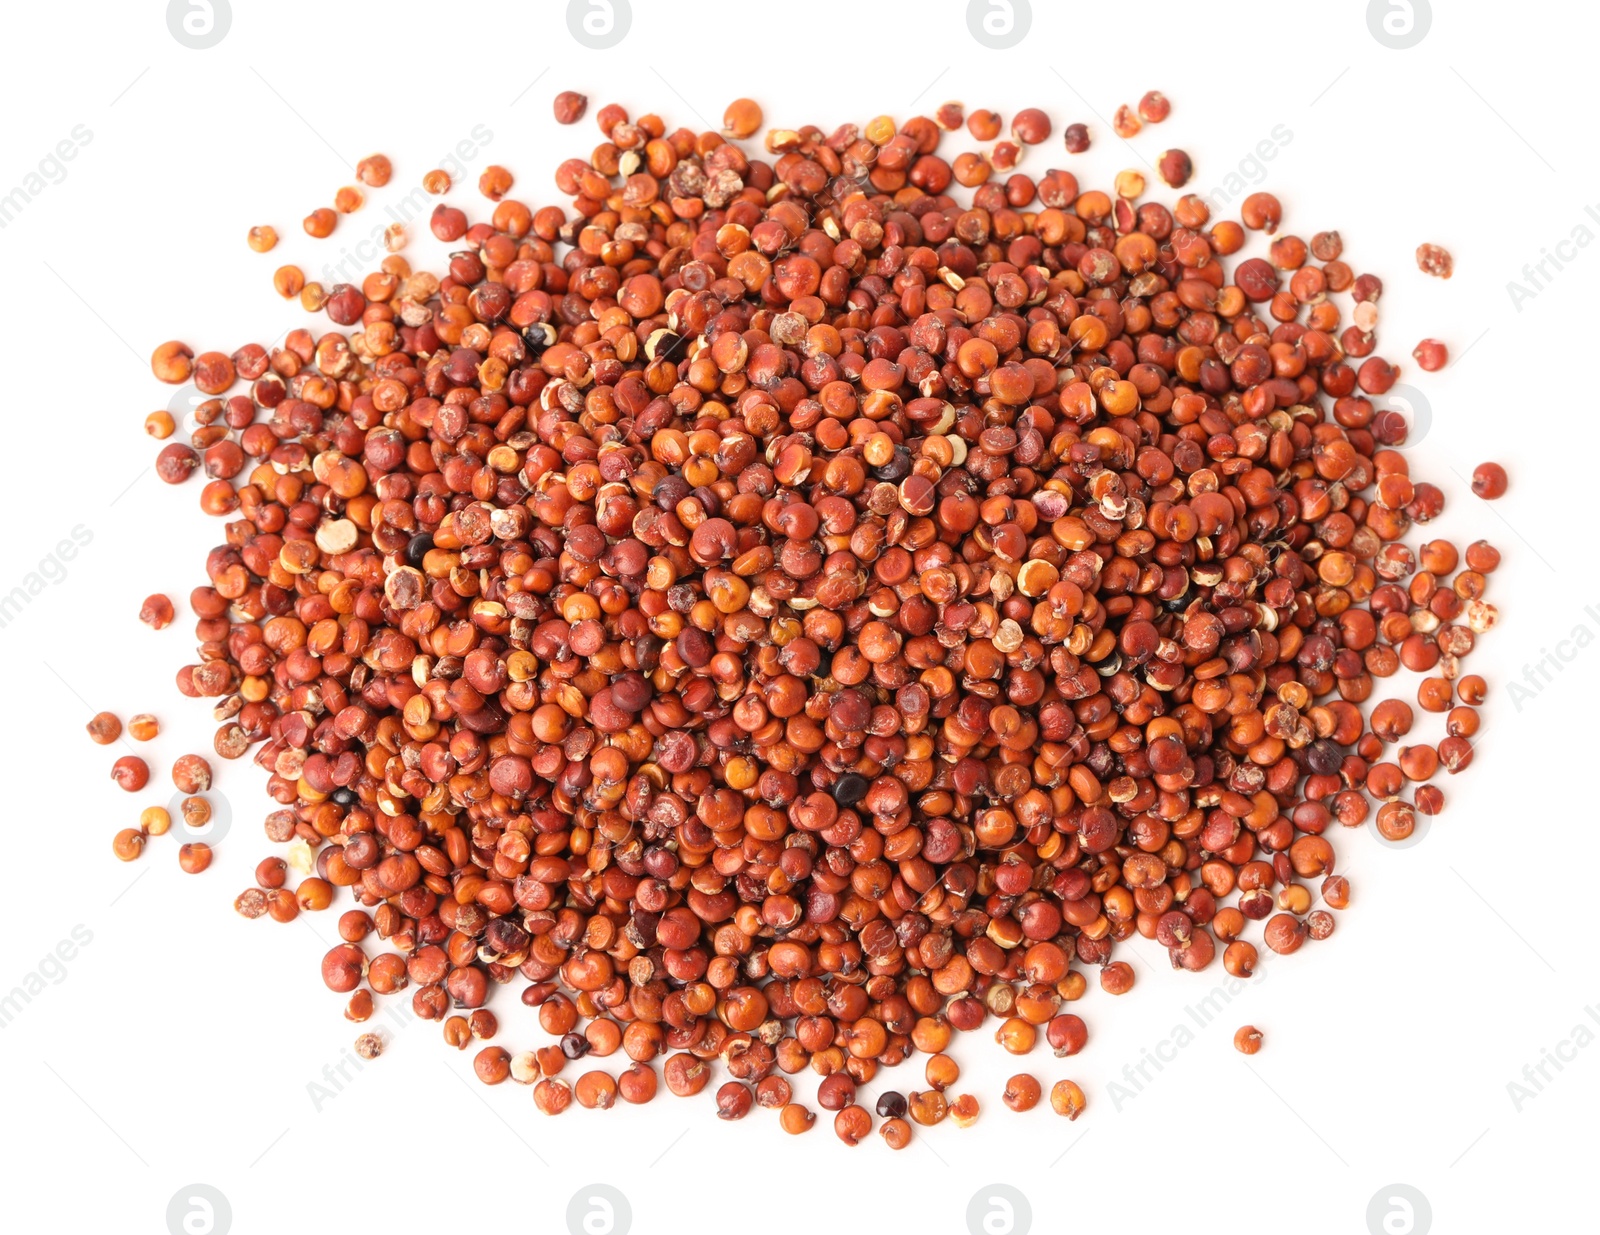 Photo of Pile of raw red quinoa seeds on white background, top view. Vegetable planting